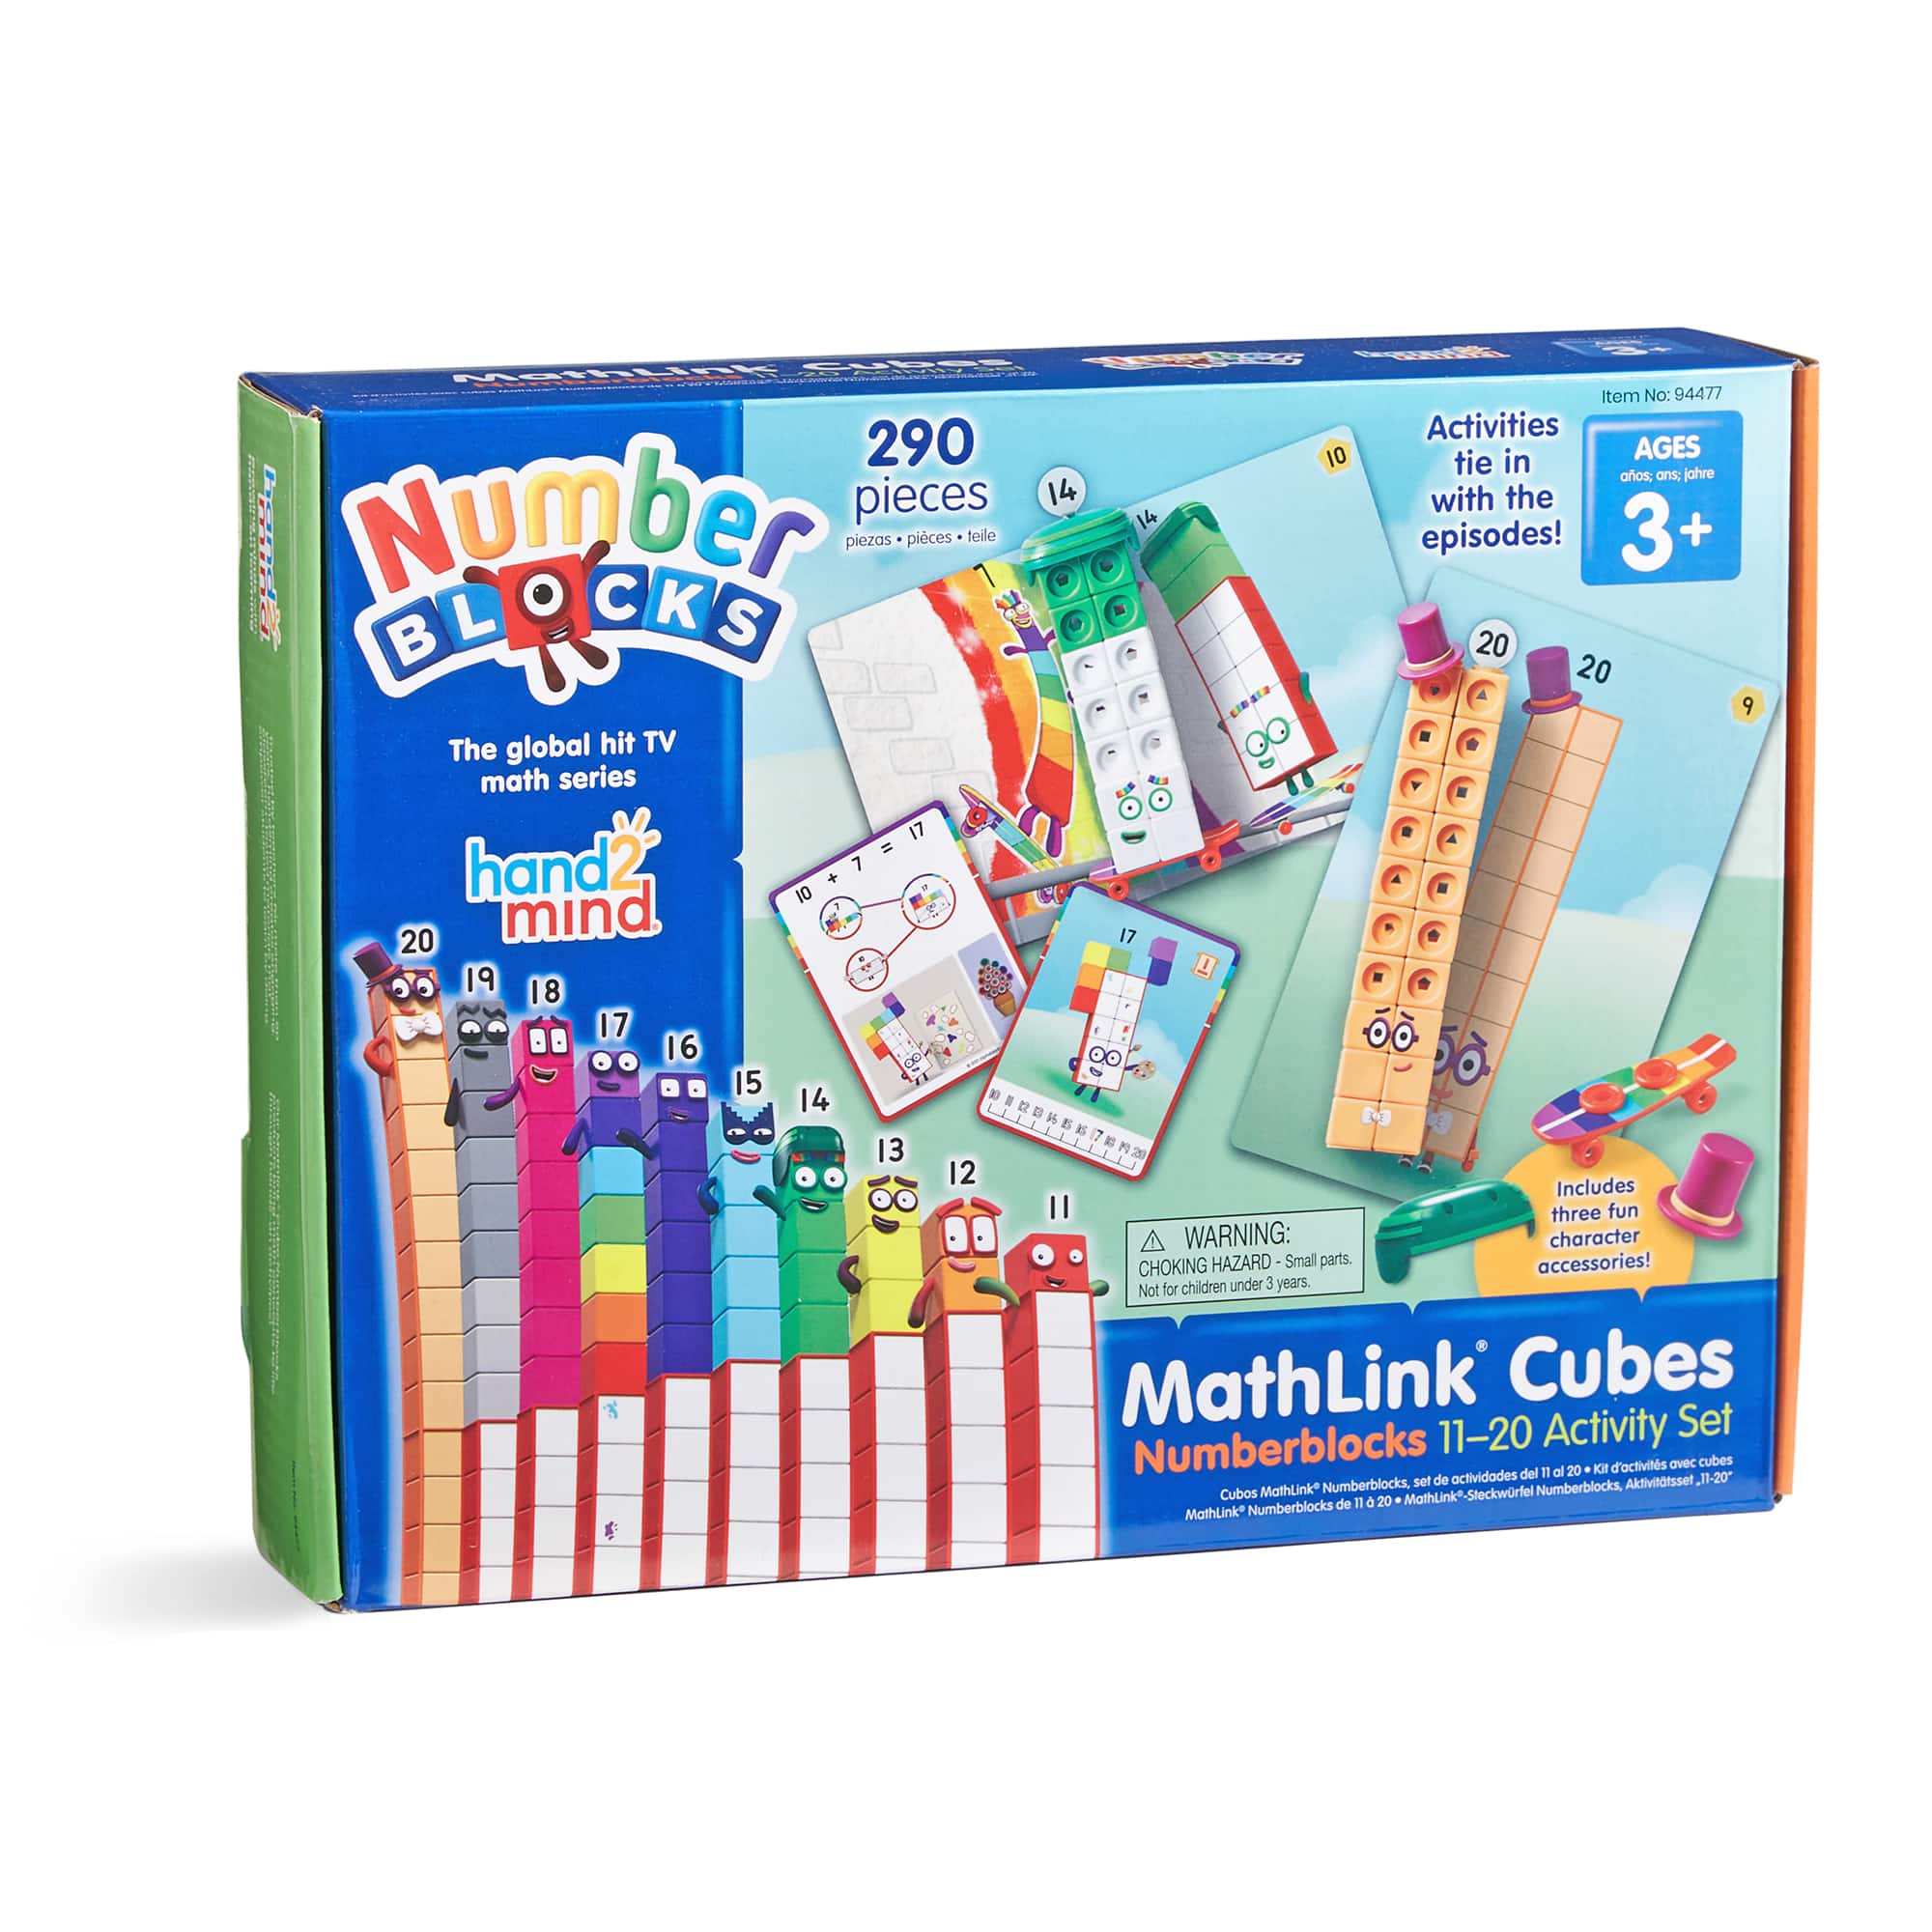  hand2mind Foam Blocks, Counting Cubes for Kids Math, 1